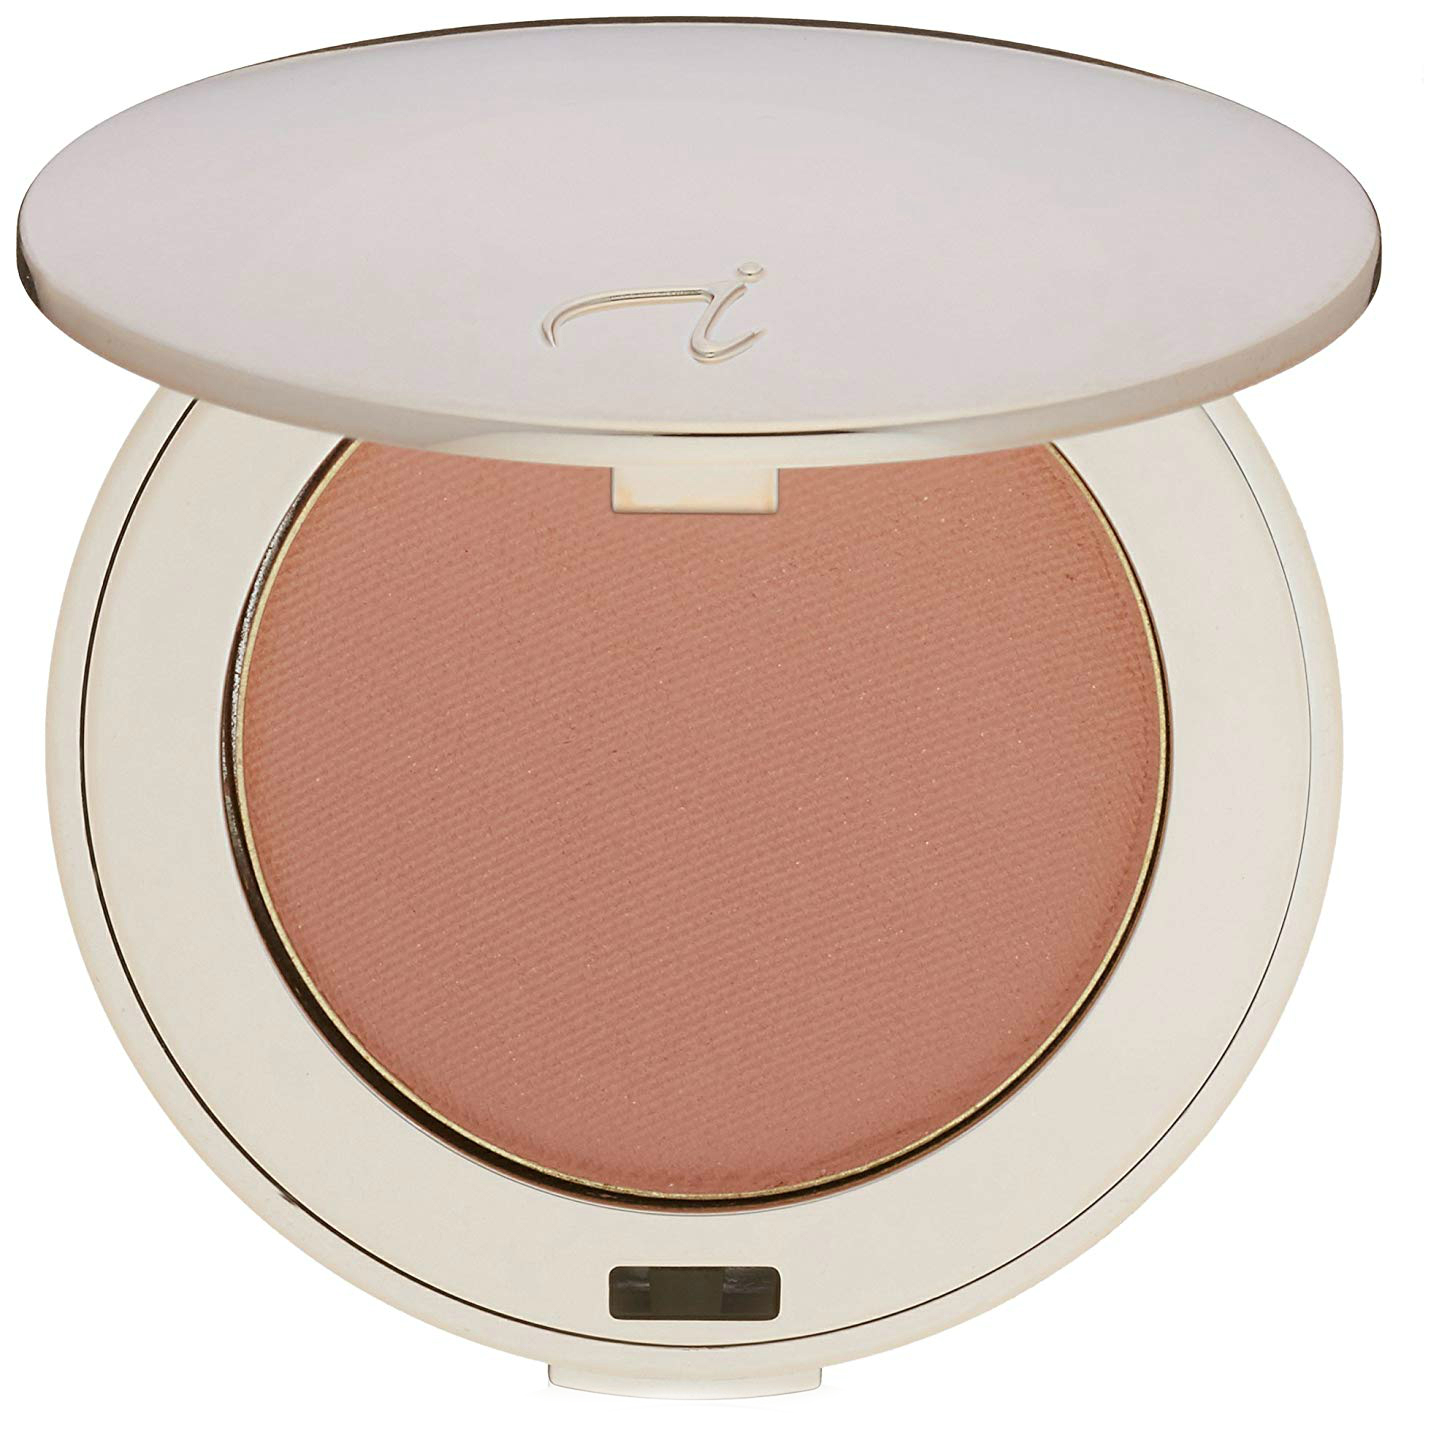 18 Best Clean Natural And Organic Blushes The Youthist 0251